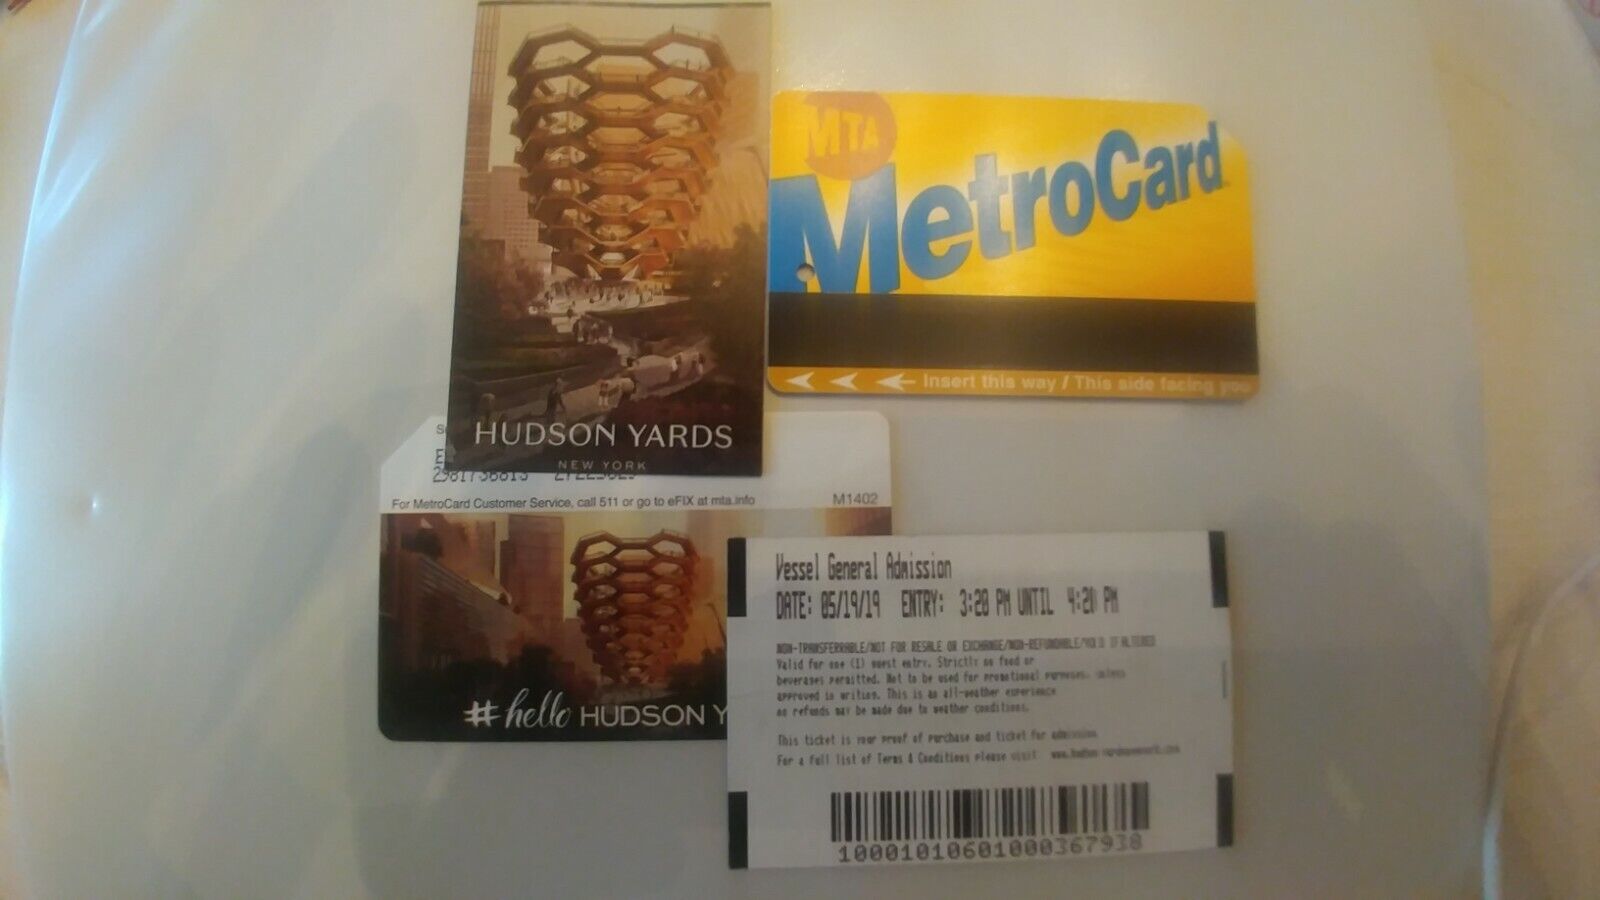 HUDSON YARDS expired METR0CARD & special VESSEL General Admission expired Ticket